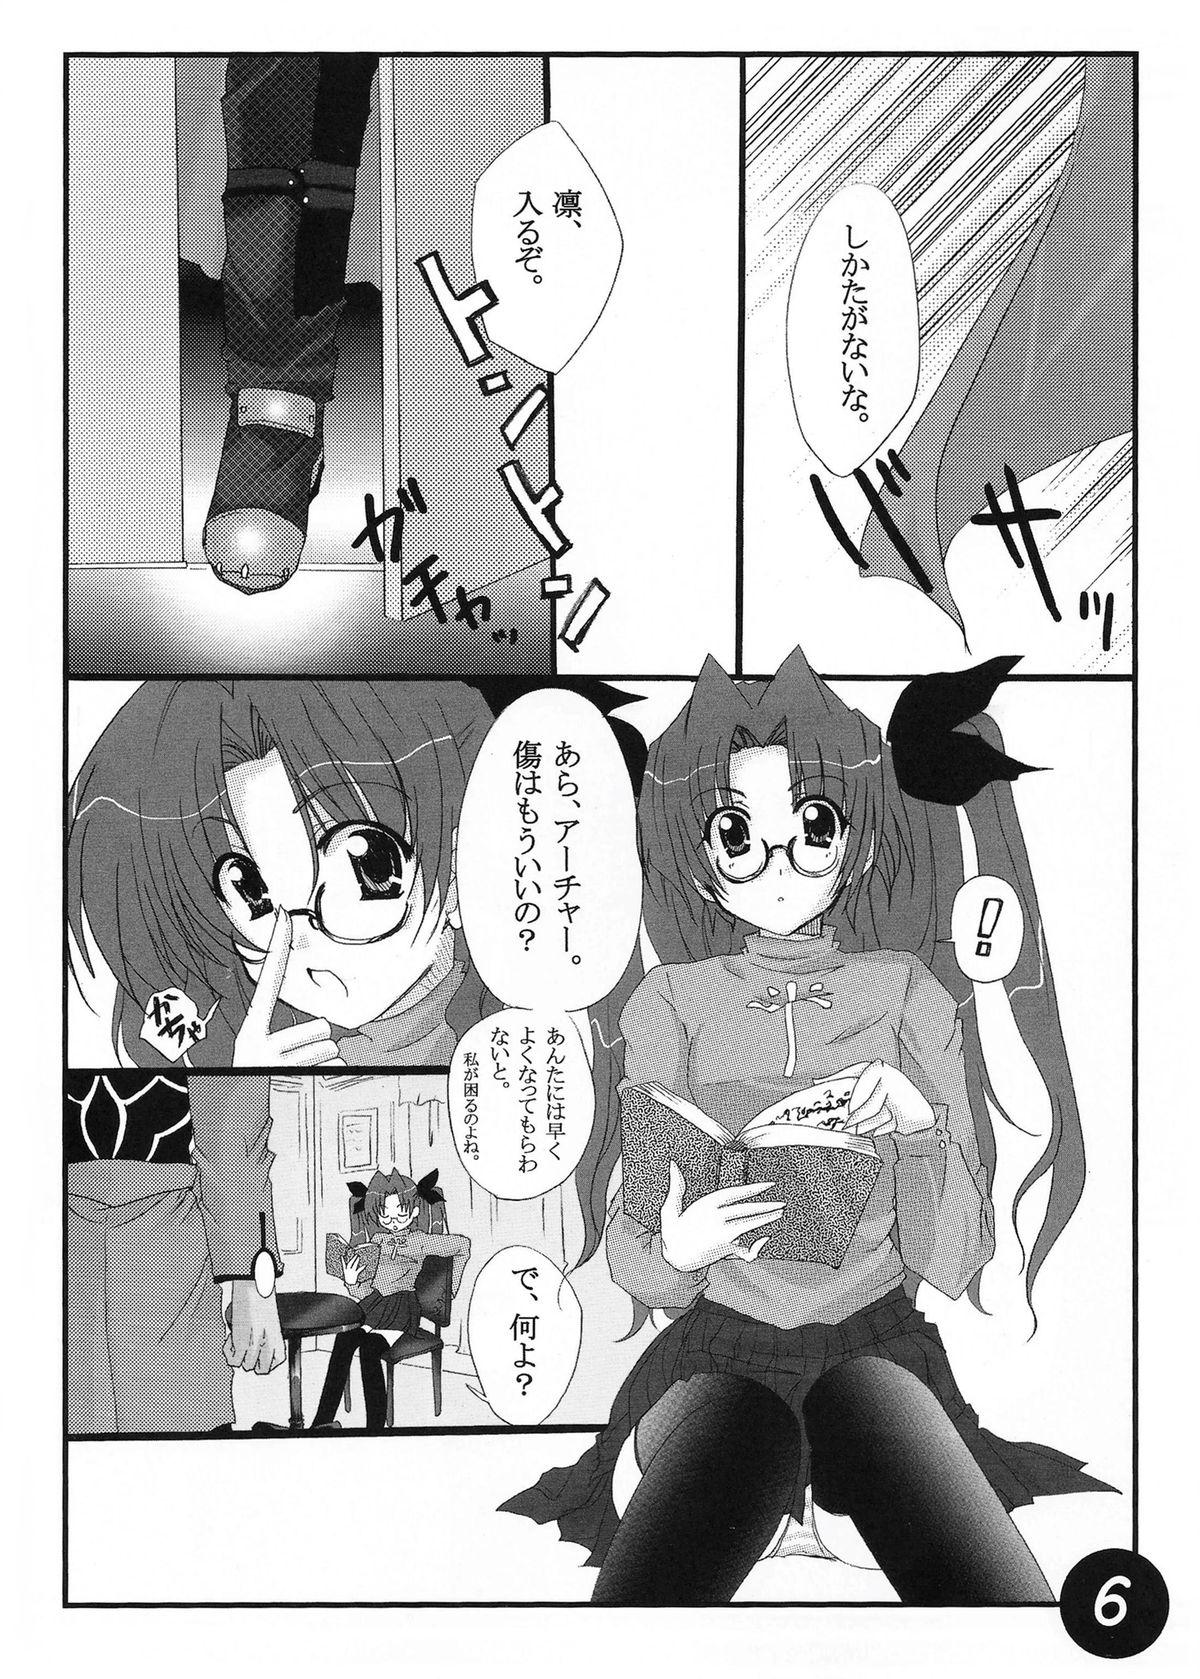 Boy Girl CATHARSIS - Fate stay night Twistys - Page 4